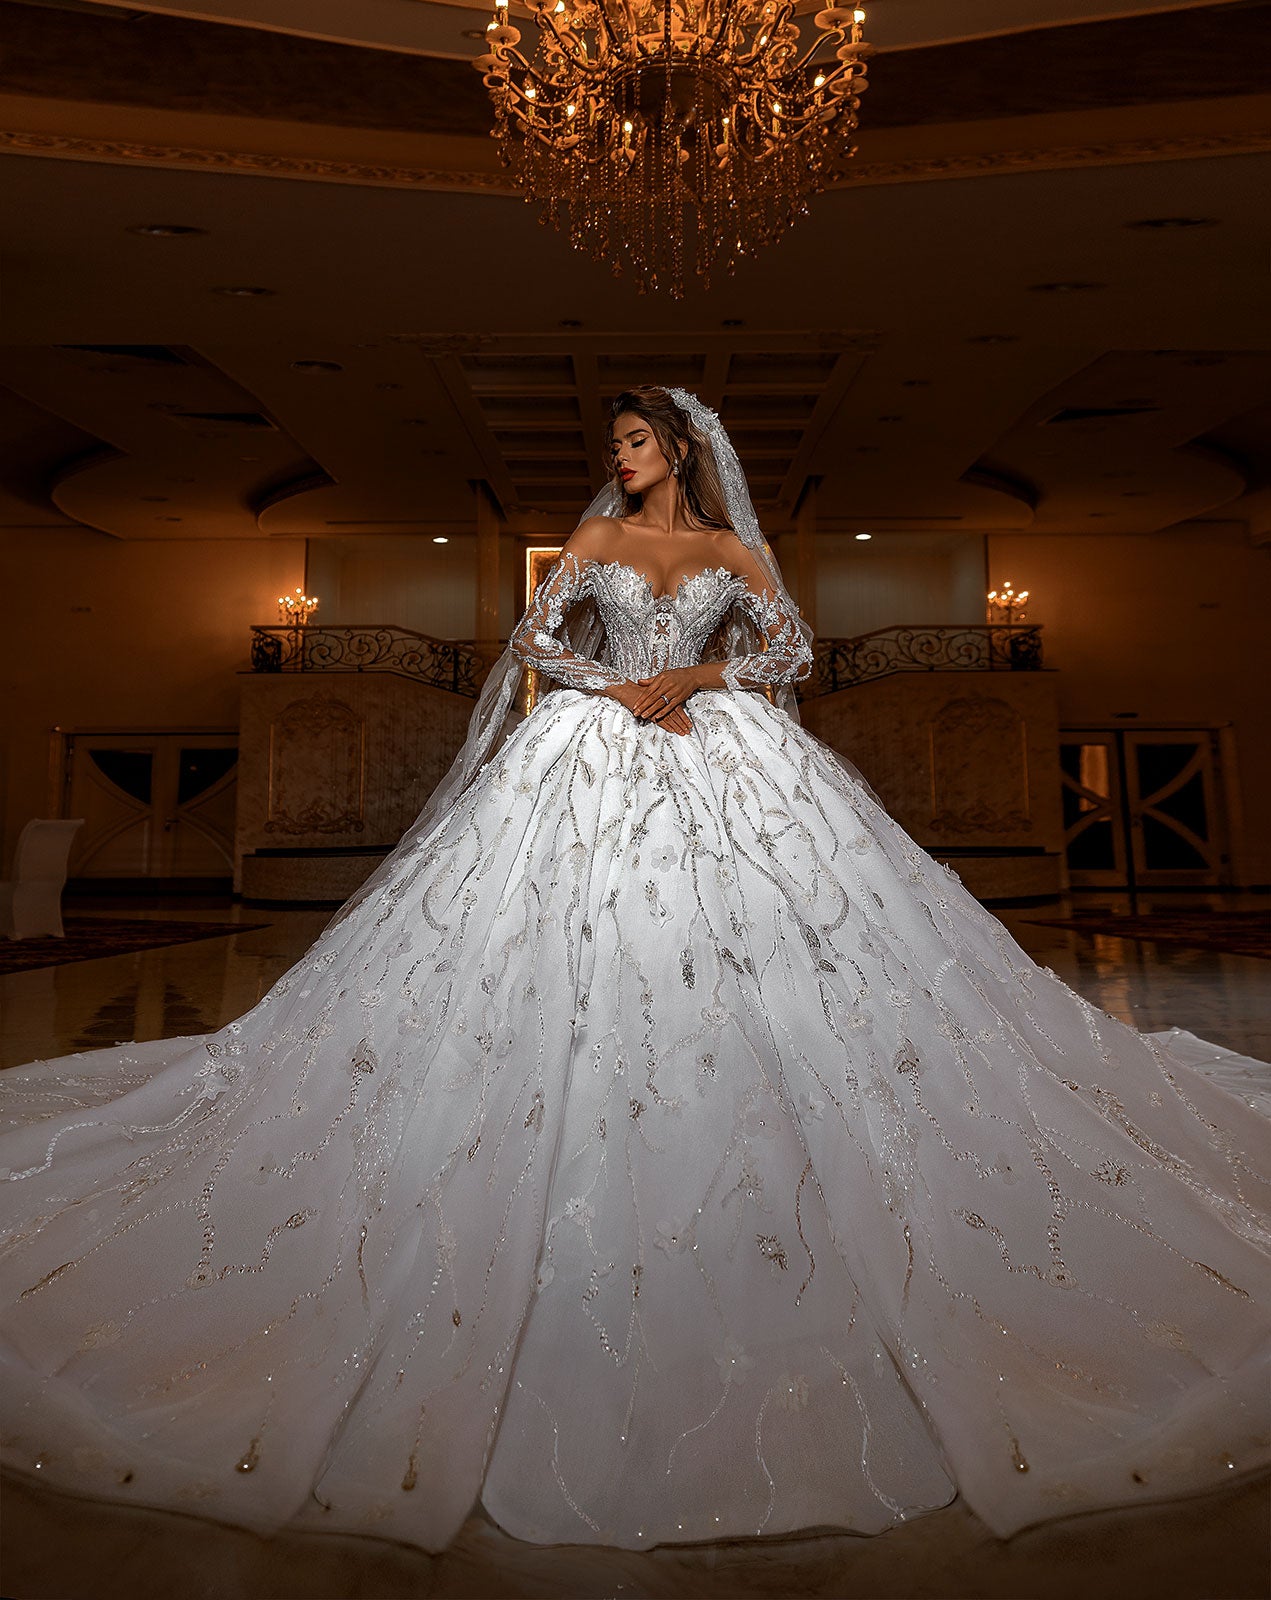 Knoxville Wedding Gowns | Proms | Formal Wear | Prom Gowns | Prom Dresses |  Homecoming Dresses | Military Ball Dresses | Plus Size Prom Gowns | Plus  Size Prom Dresses |